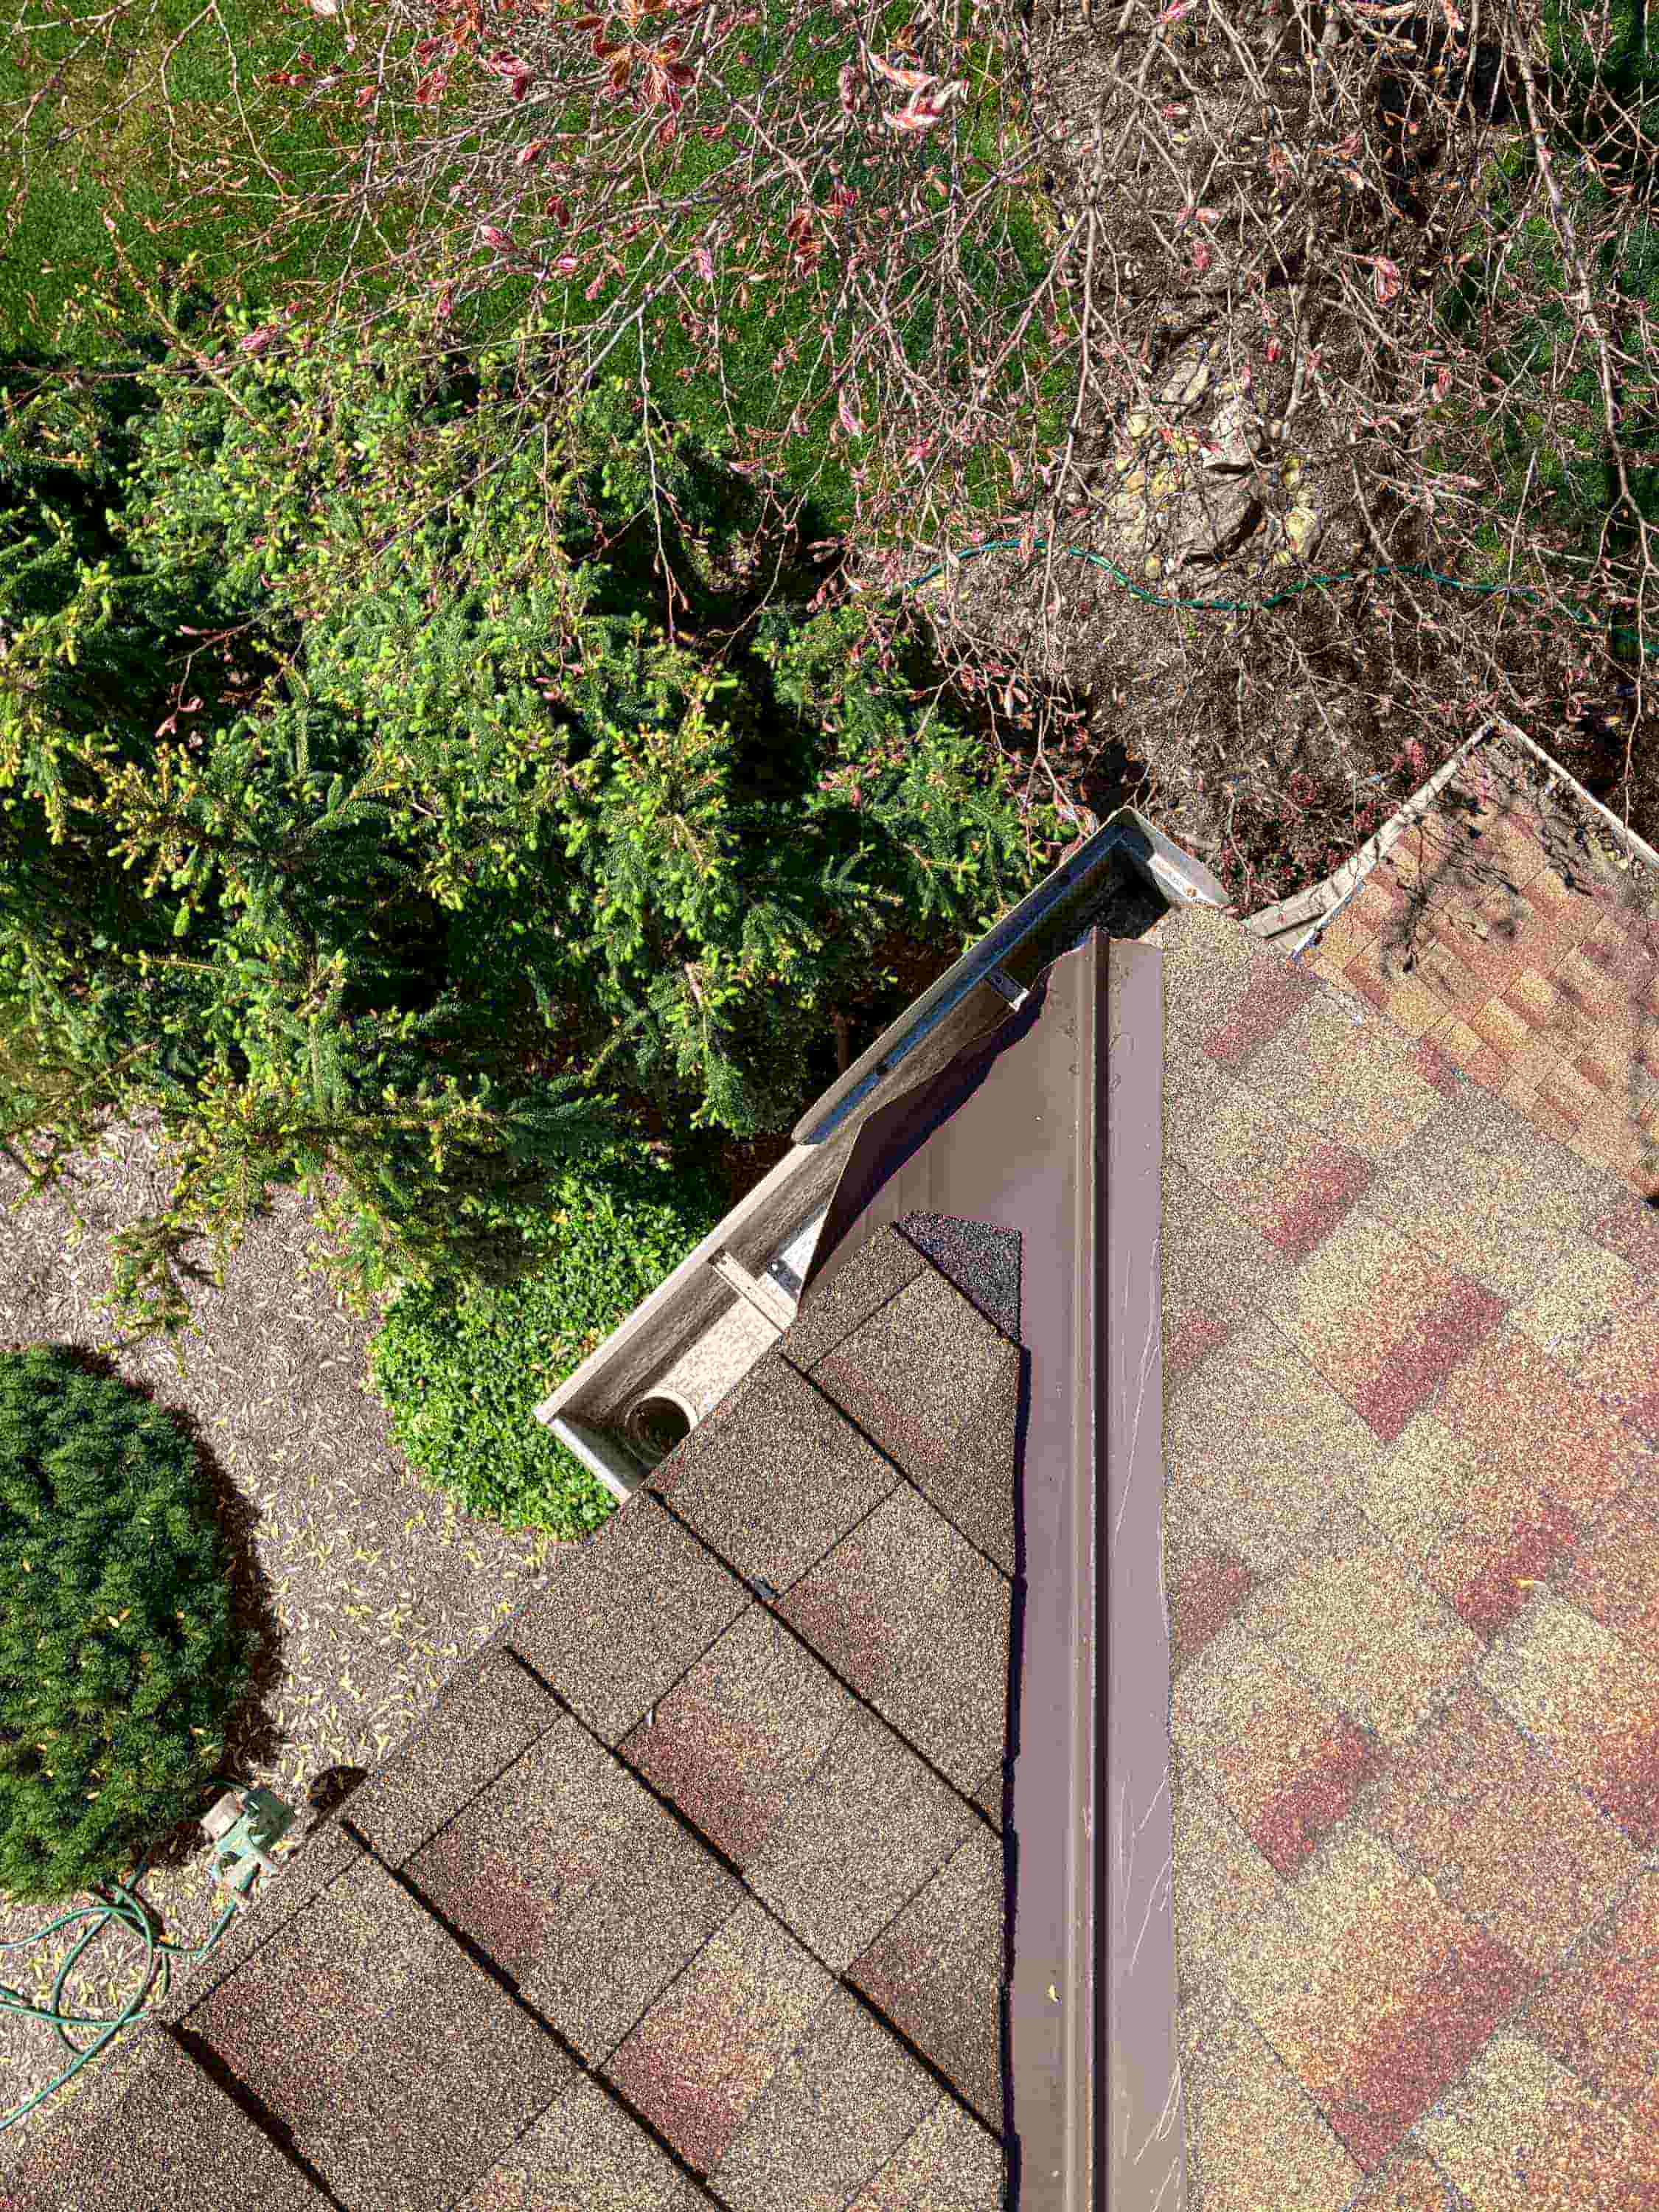 how to fix gutters